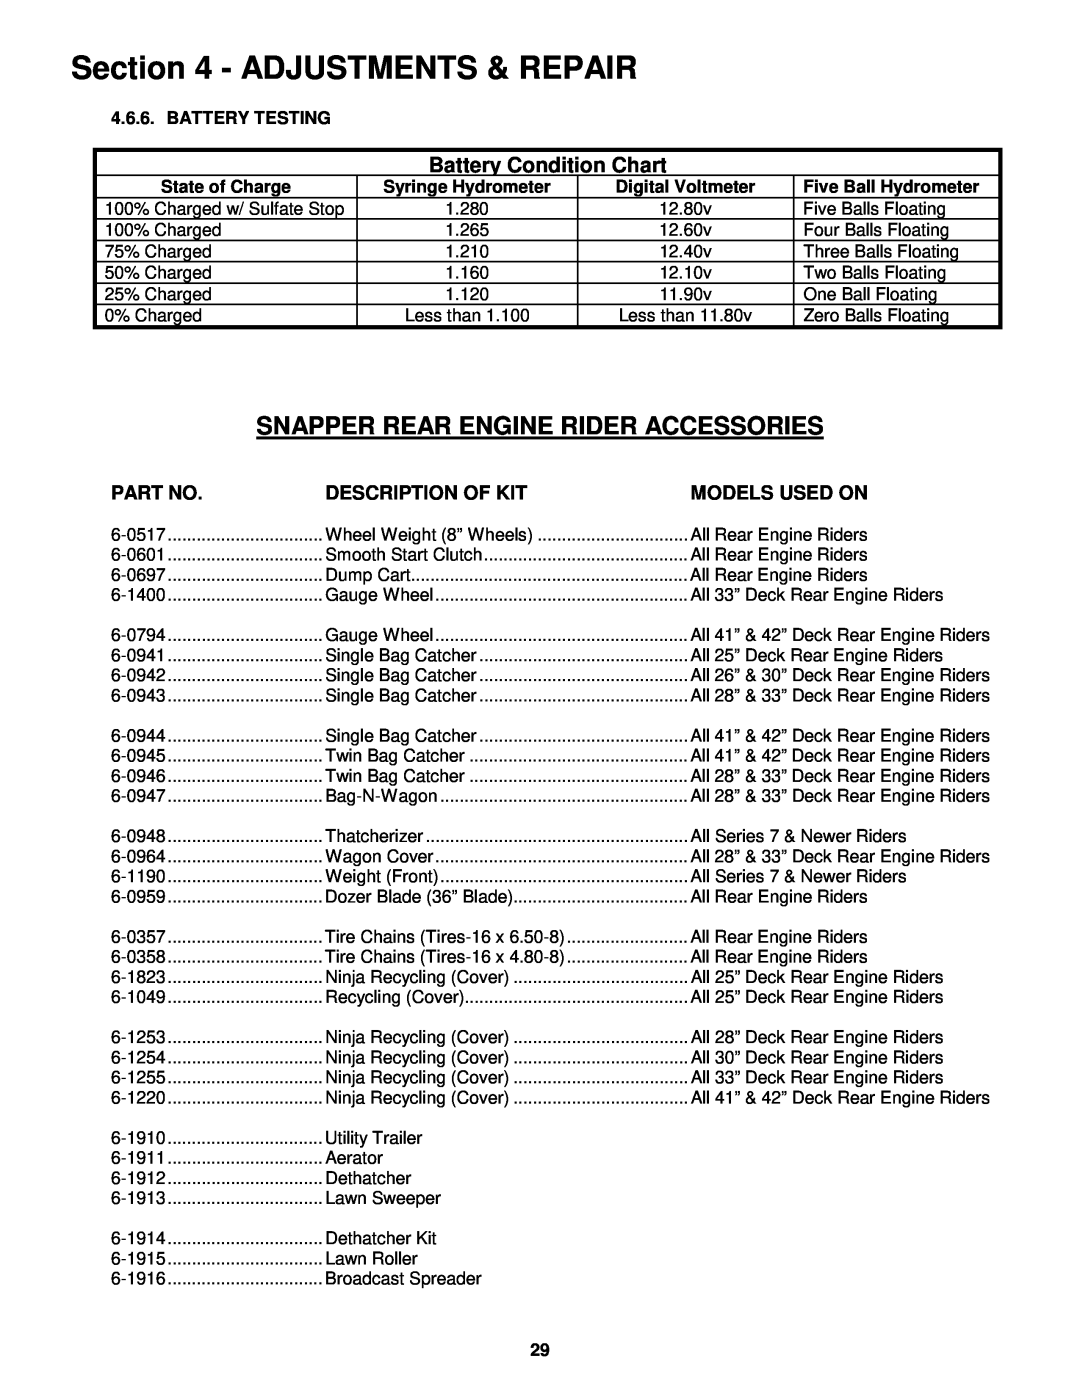 Snapper EM250821BE, EM281021BE Snapper Rear Engine Rider Accessories, Adjustments & Repair, Battery Condition Chart 